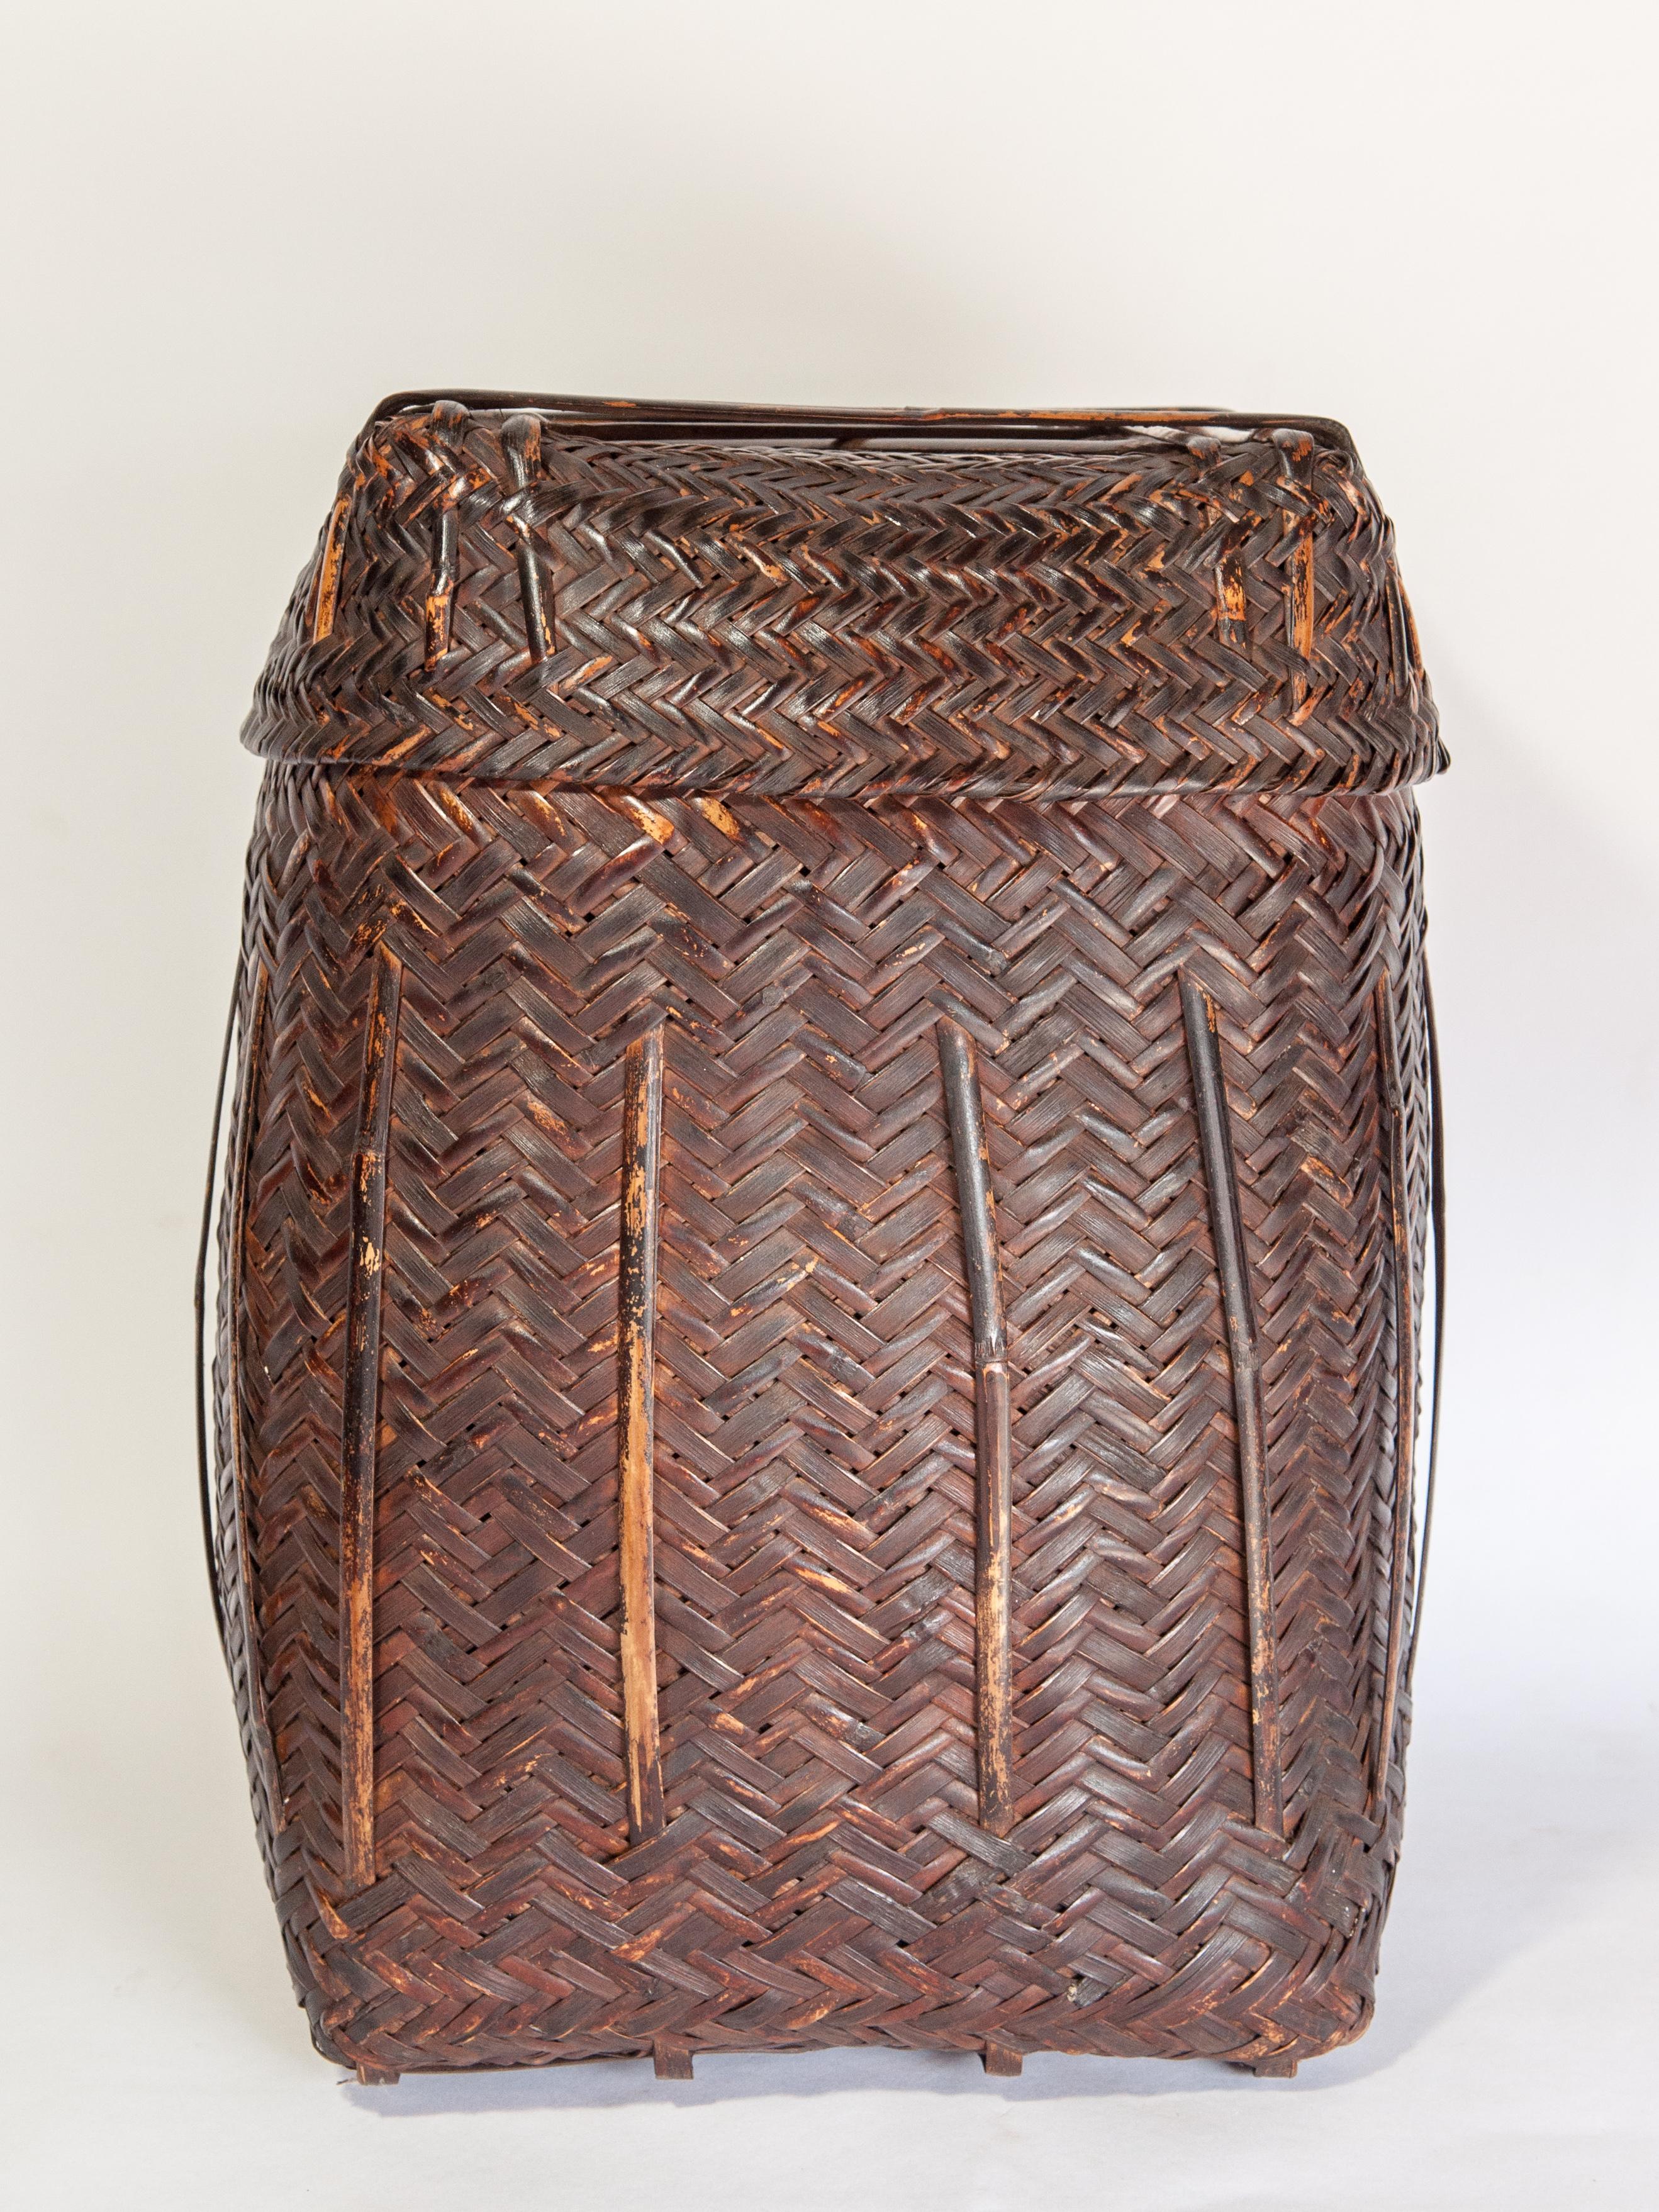 Tribal storage basket box with Lid from the Magar of Nepal, mid-20th century.
This rustic bamboo basket was primarily used as a storage basket for household goods. It comes from the Magar, an important ethnic group of the hills and mountains of